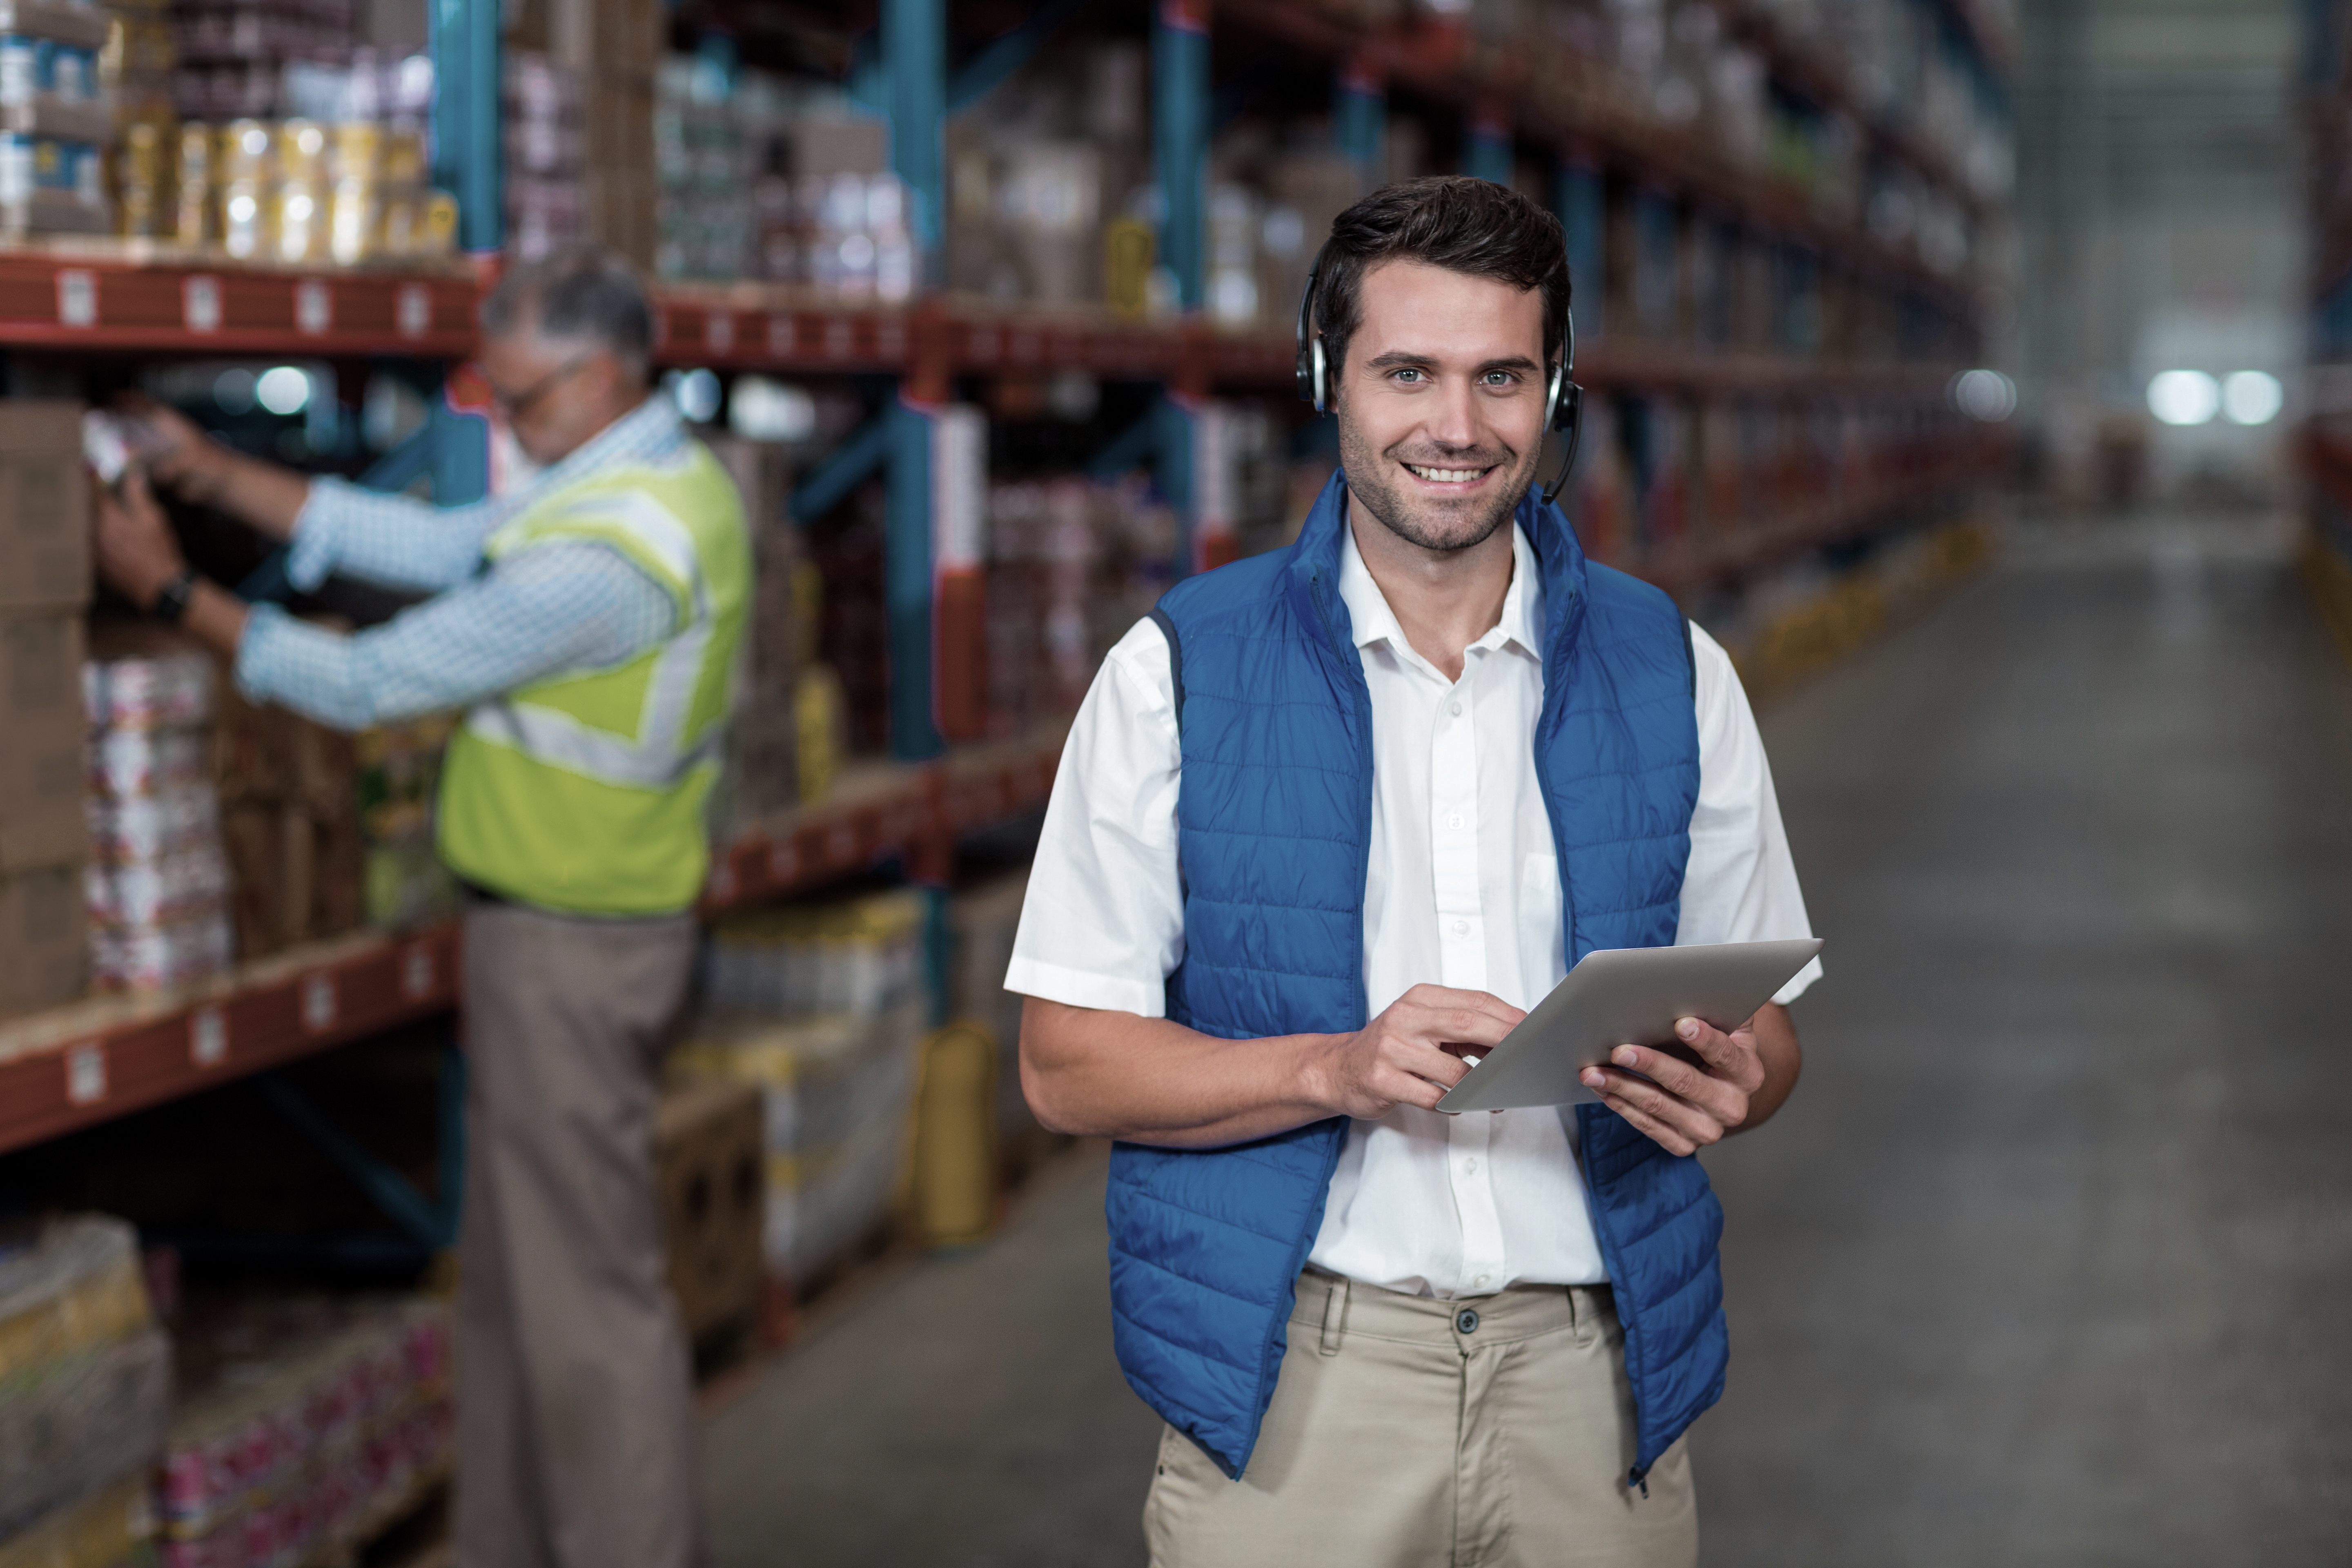 Standing Worker Smiling At Camera While Holding Digital Tablet